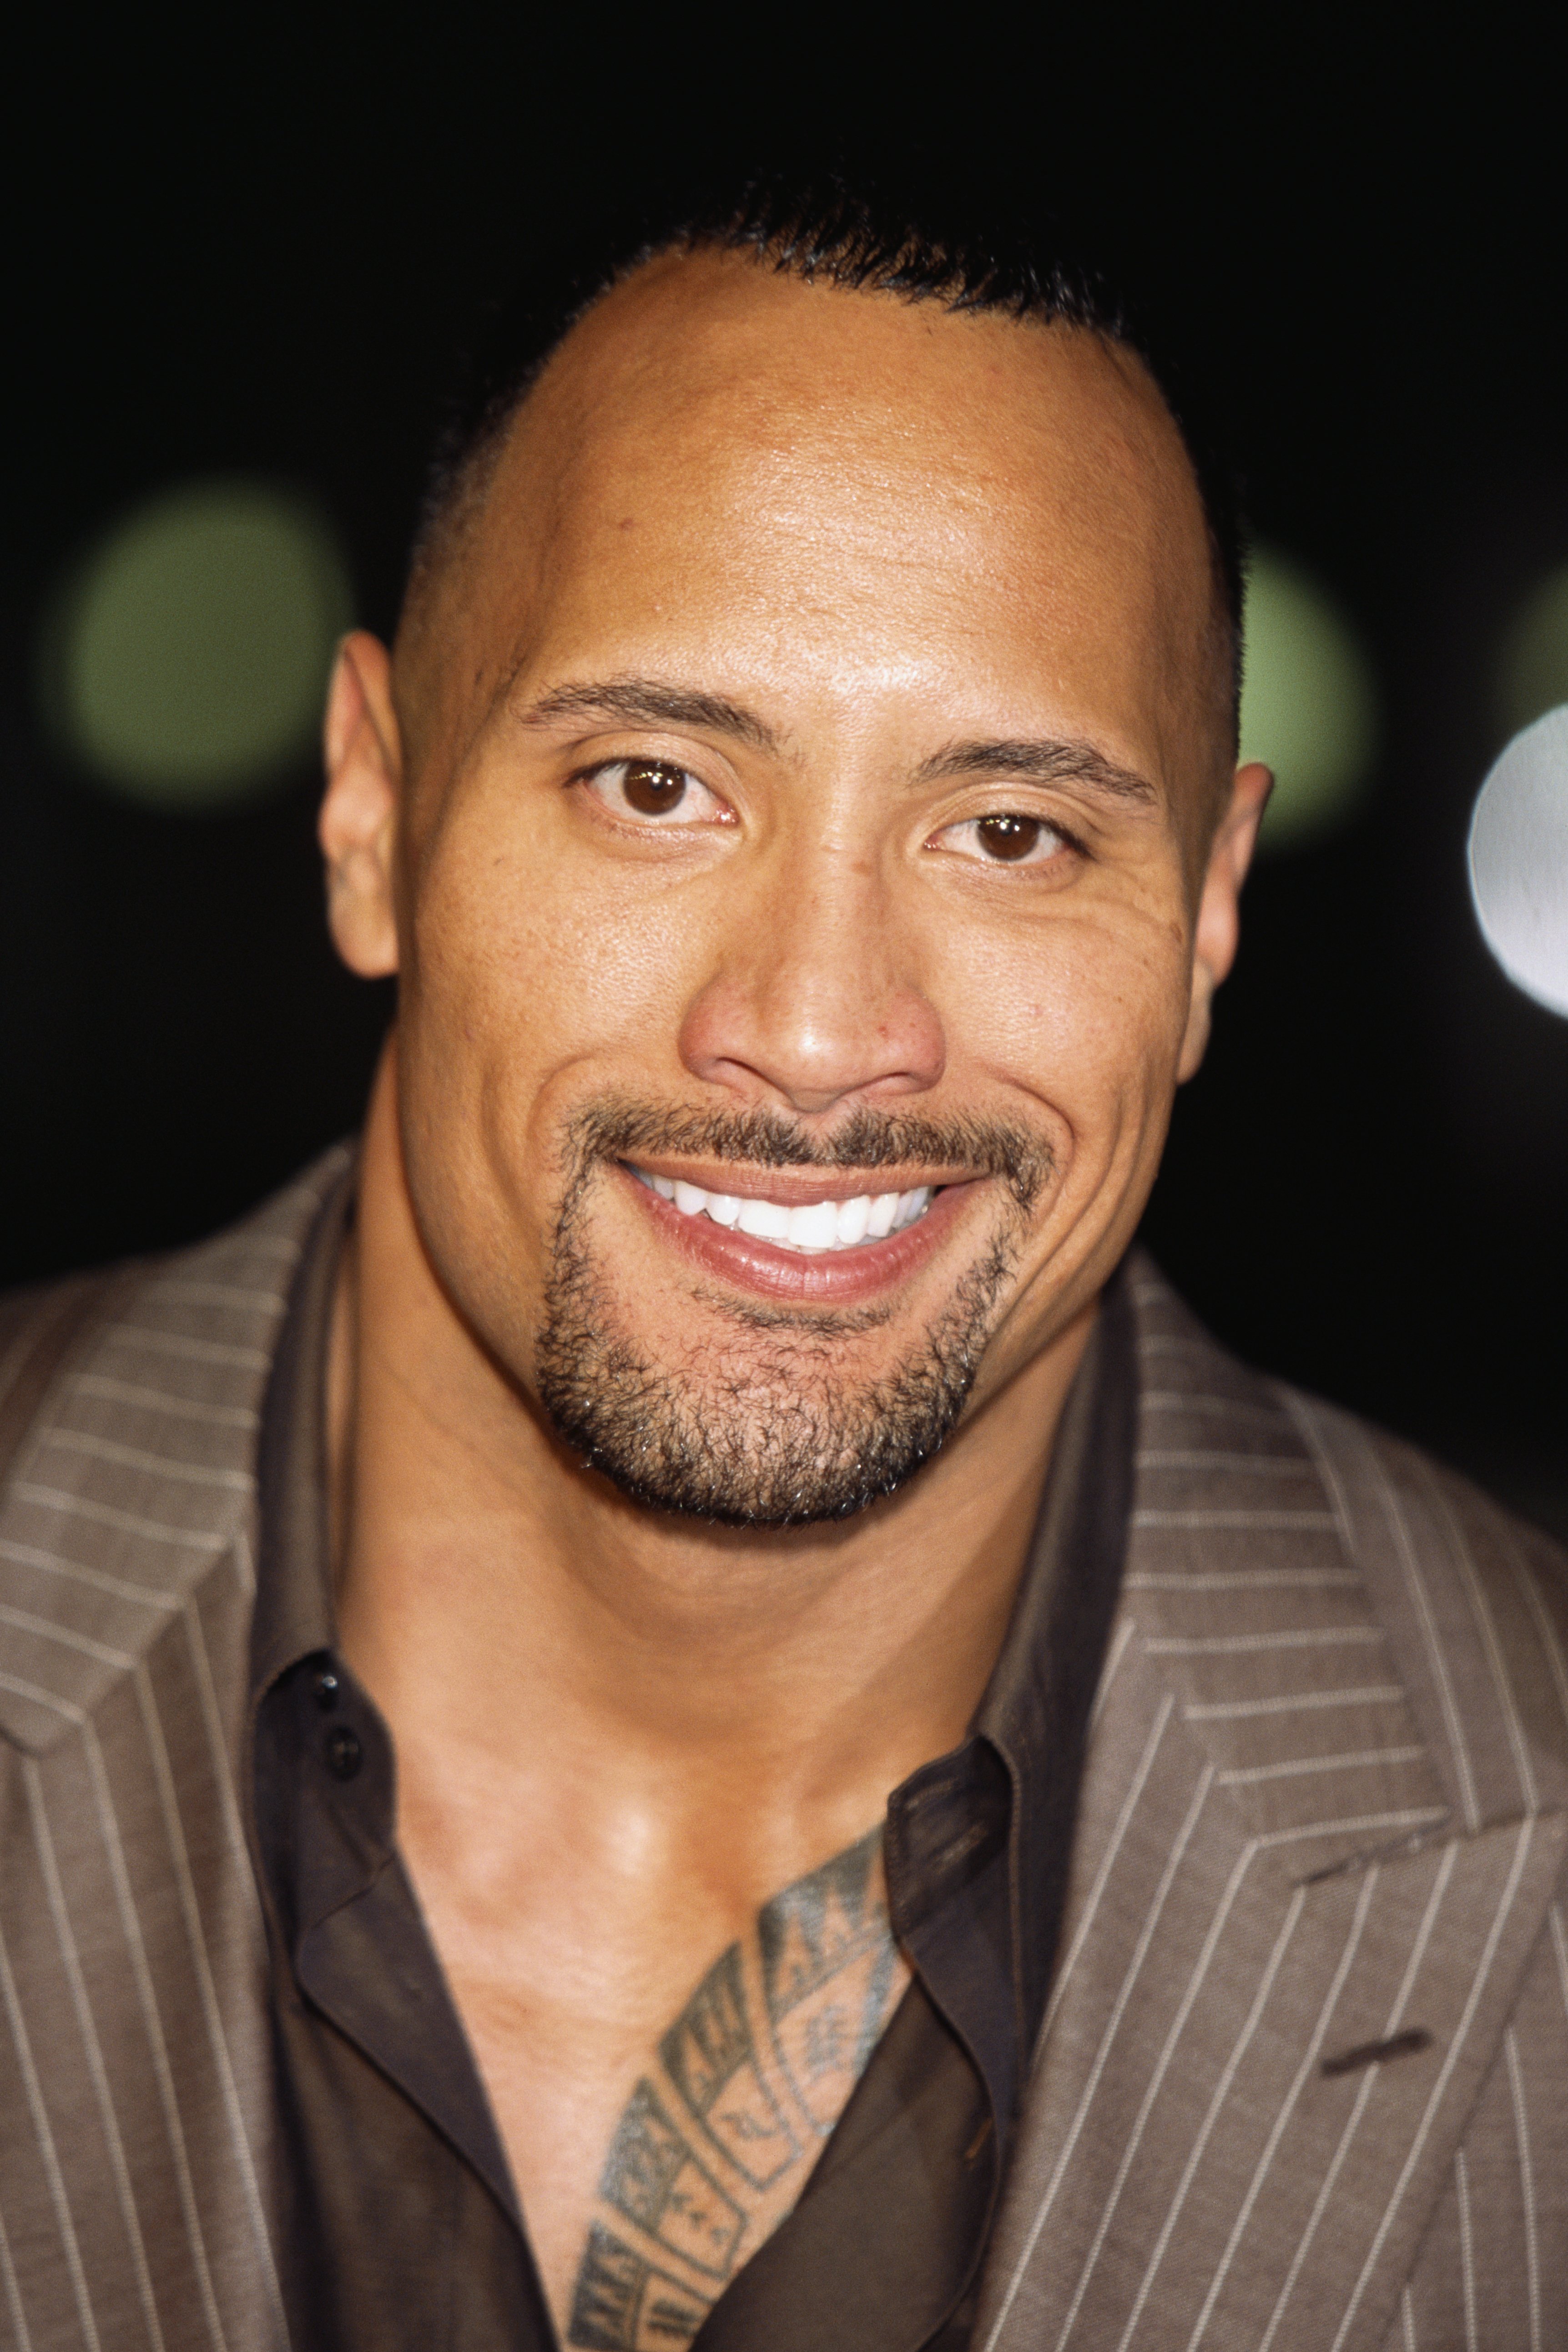 An undated and unspecified colour photo of Dwayne Johnson when he was younger | Source: Getty Images